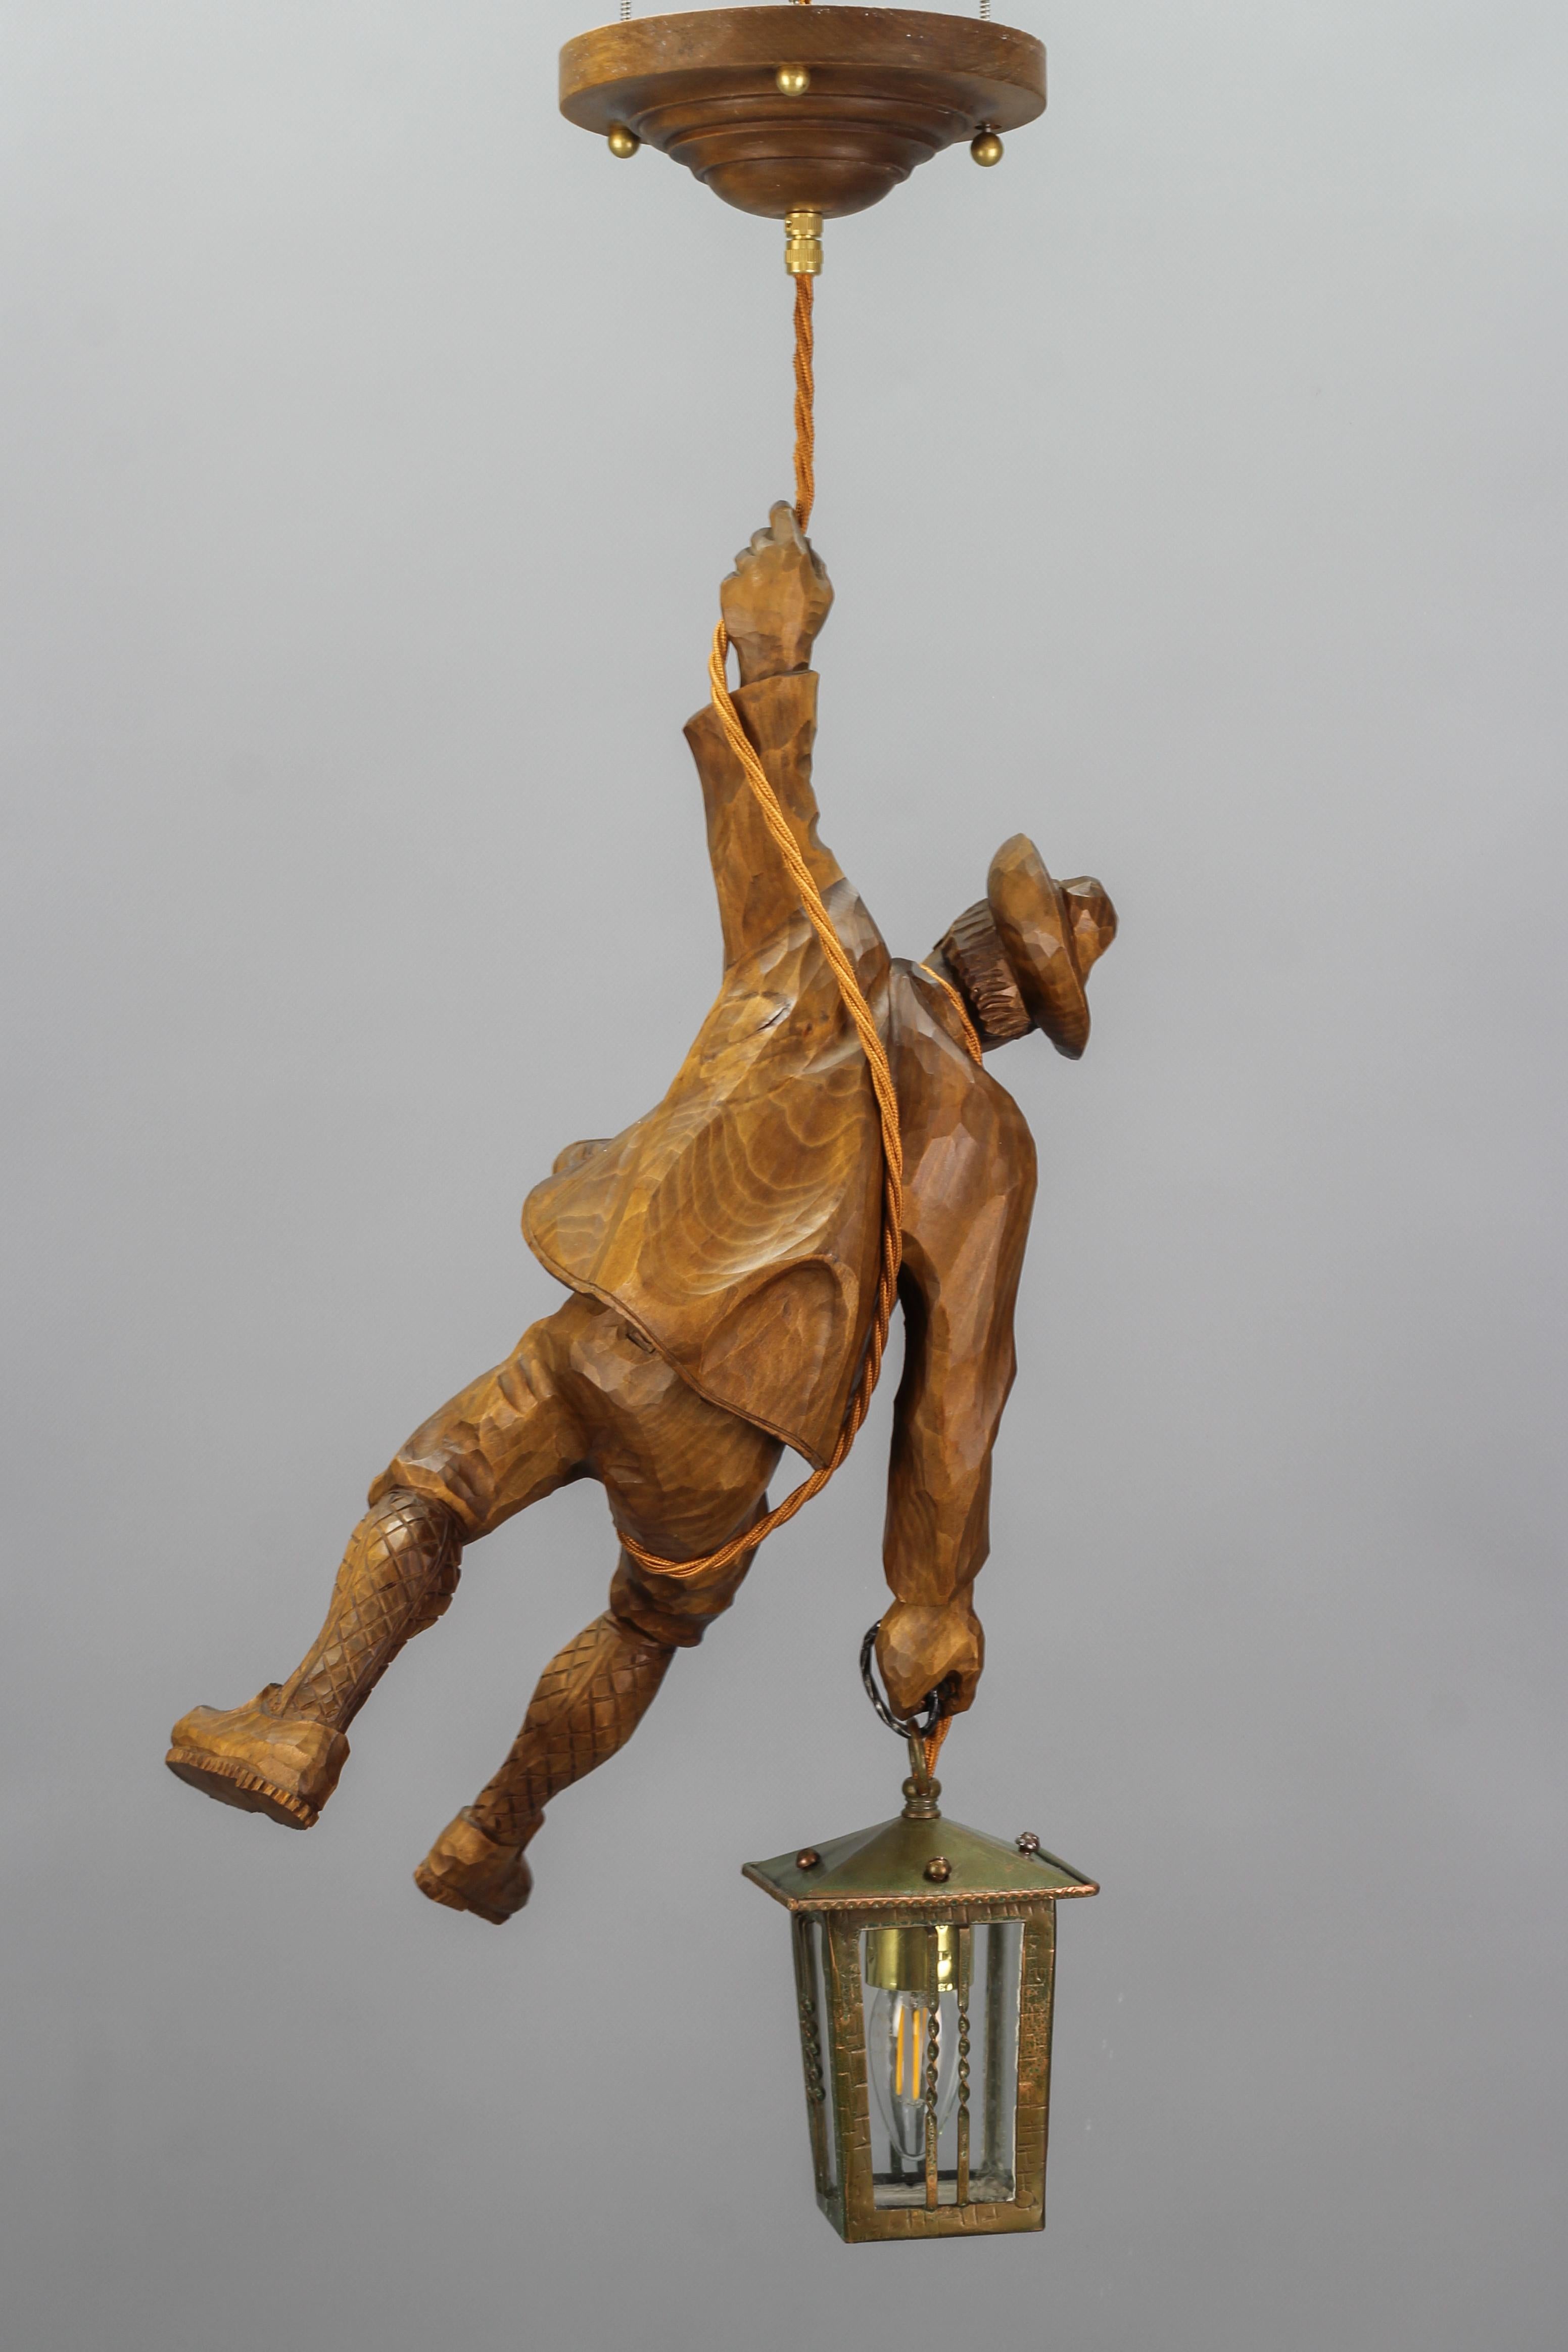 Mid-20th Century German Pendant Light with a Carved Wooden Figure of Mountain Climber and Lantern For Sale